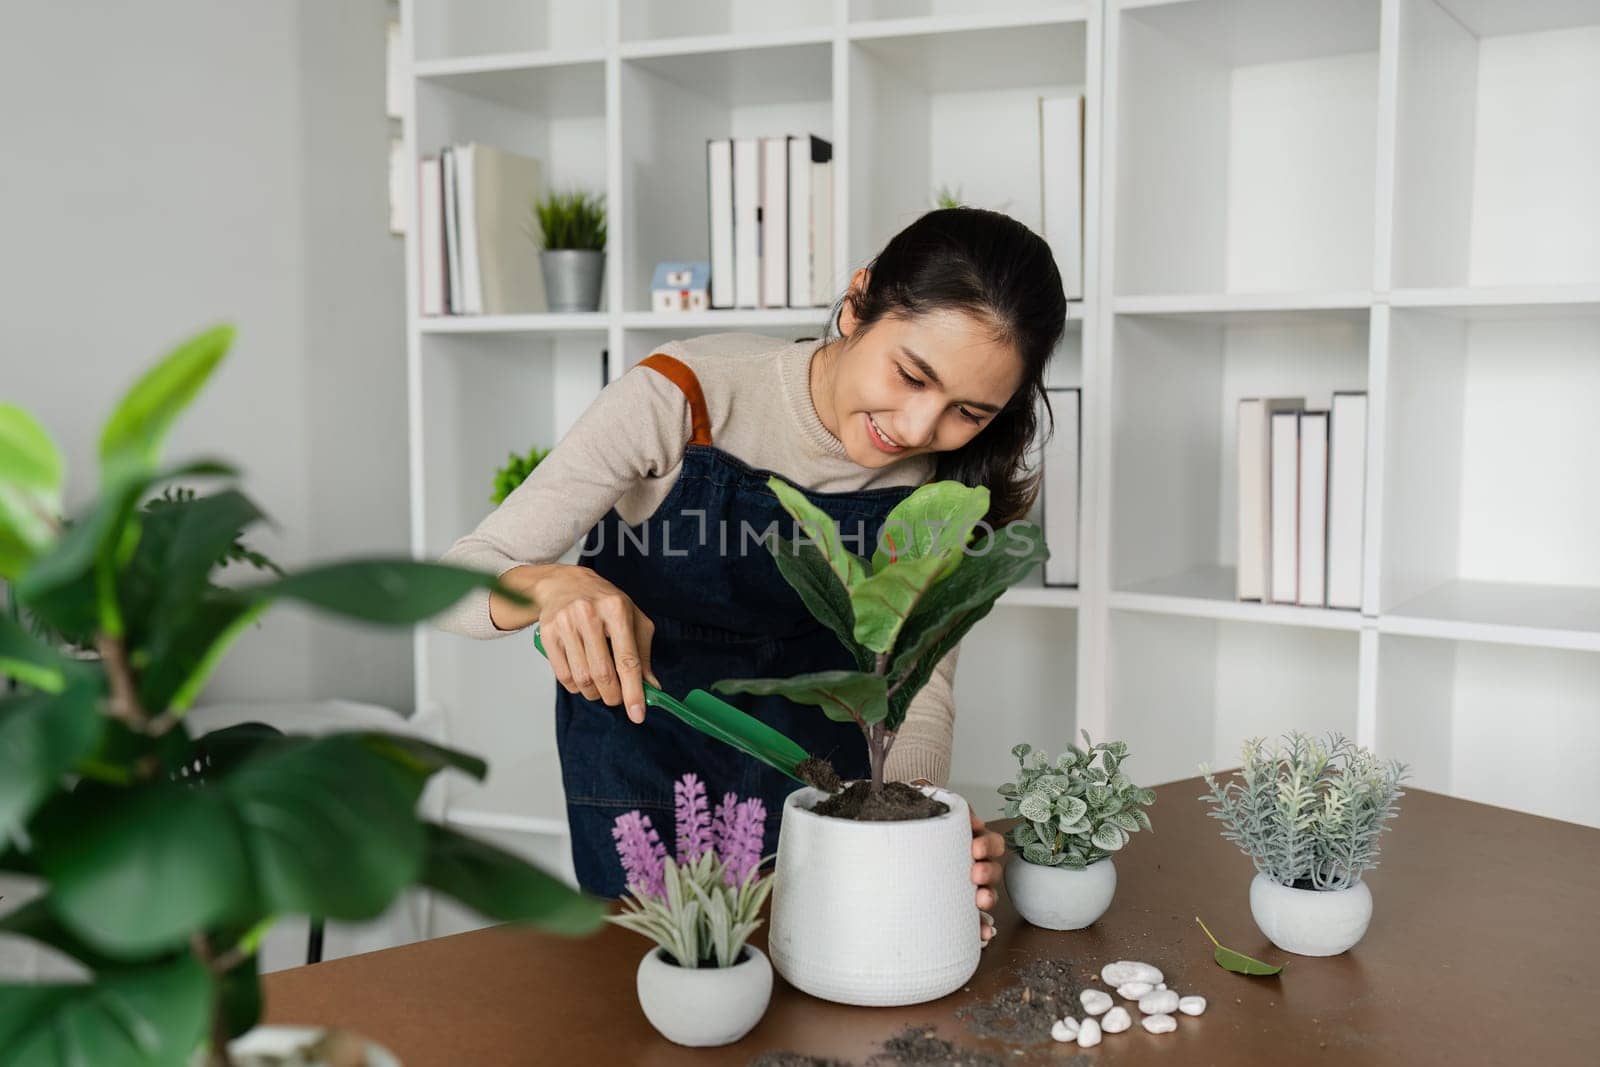 woman is planting a plant in a white pot as hobby and decorates her office by itchaznong